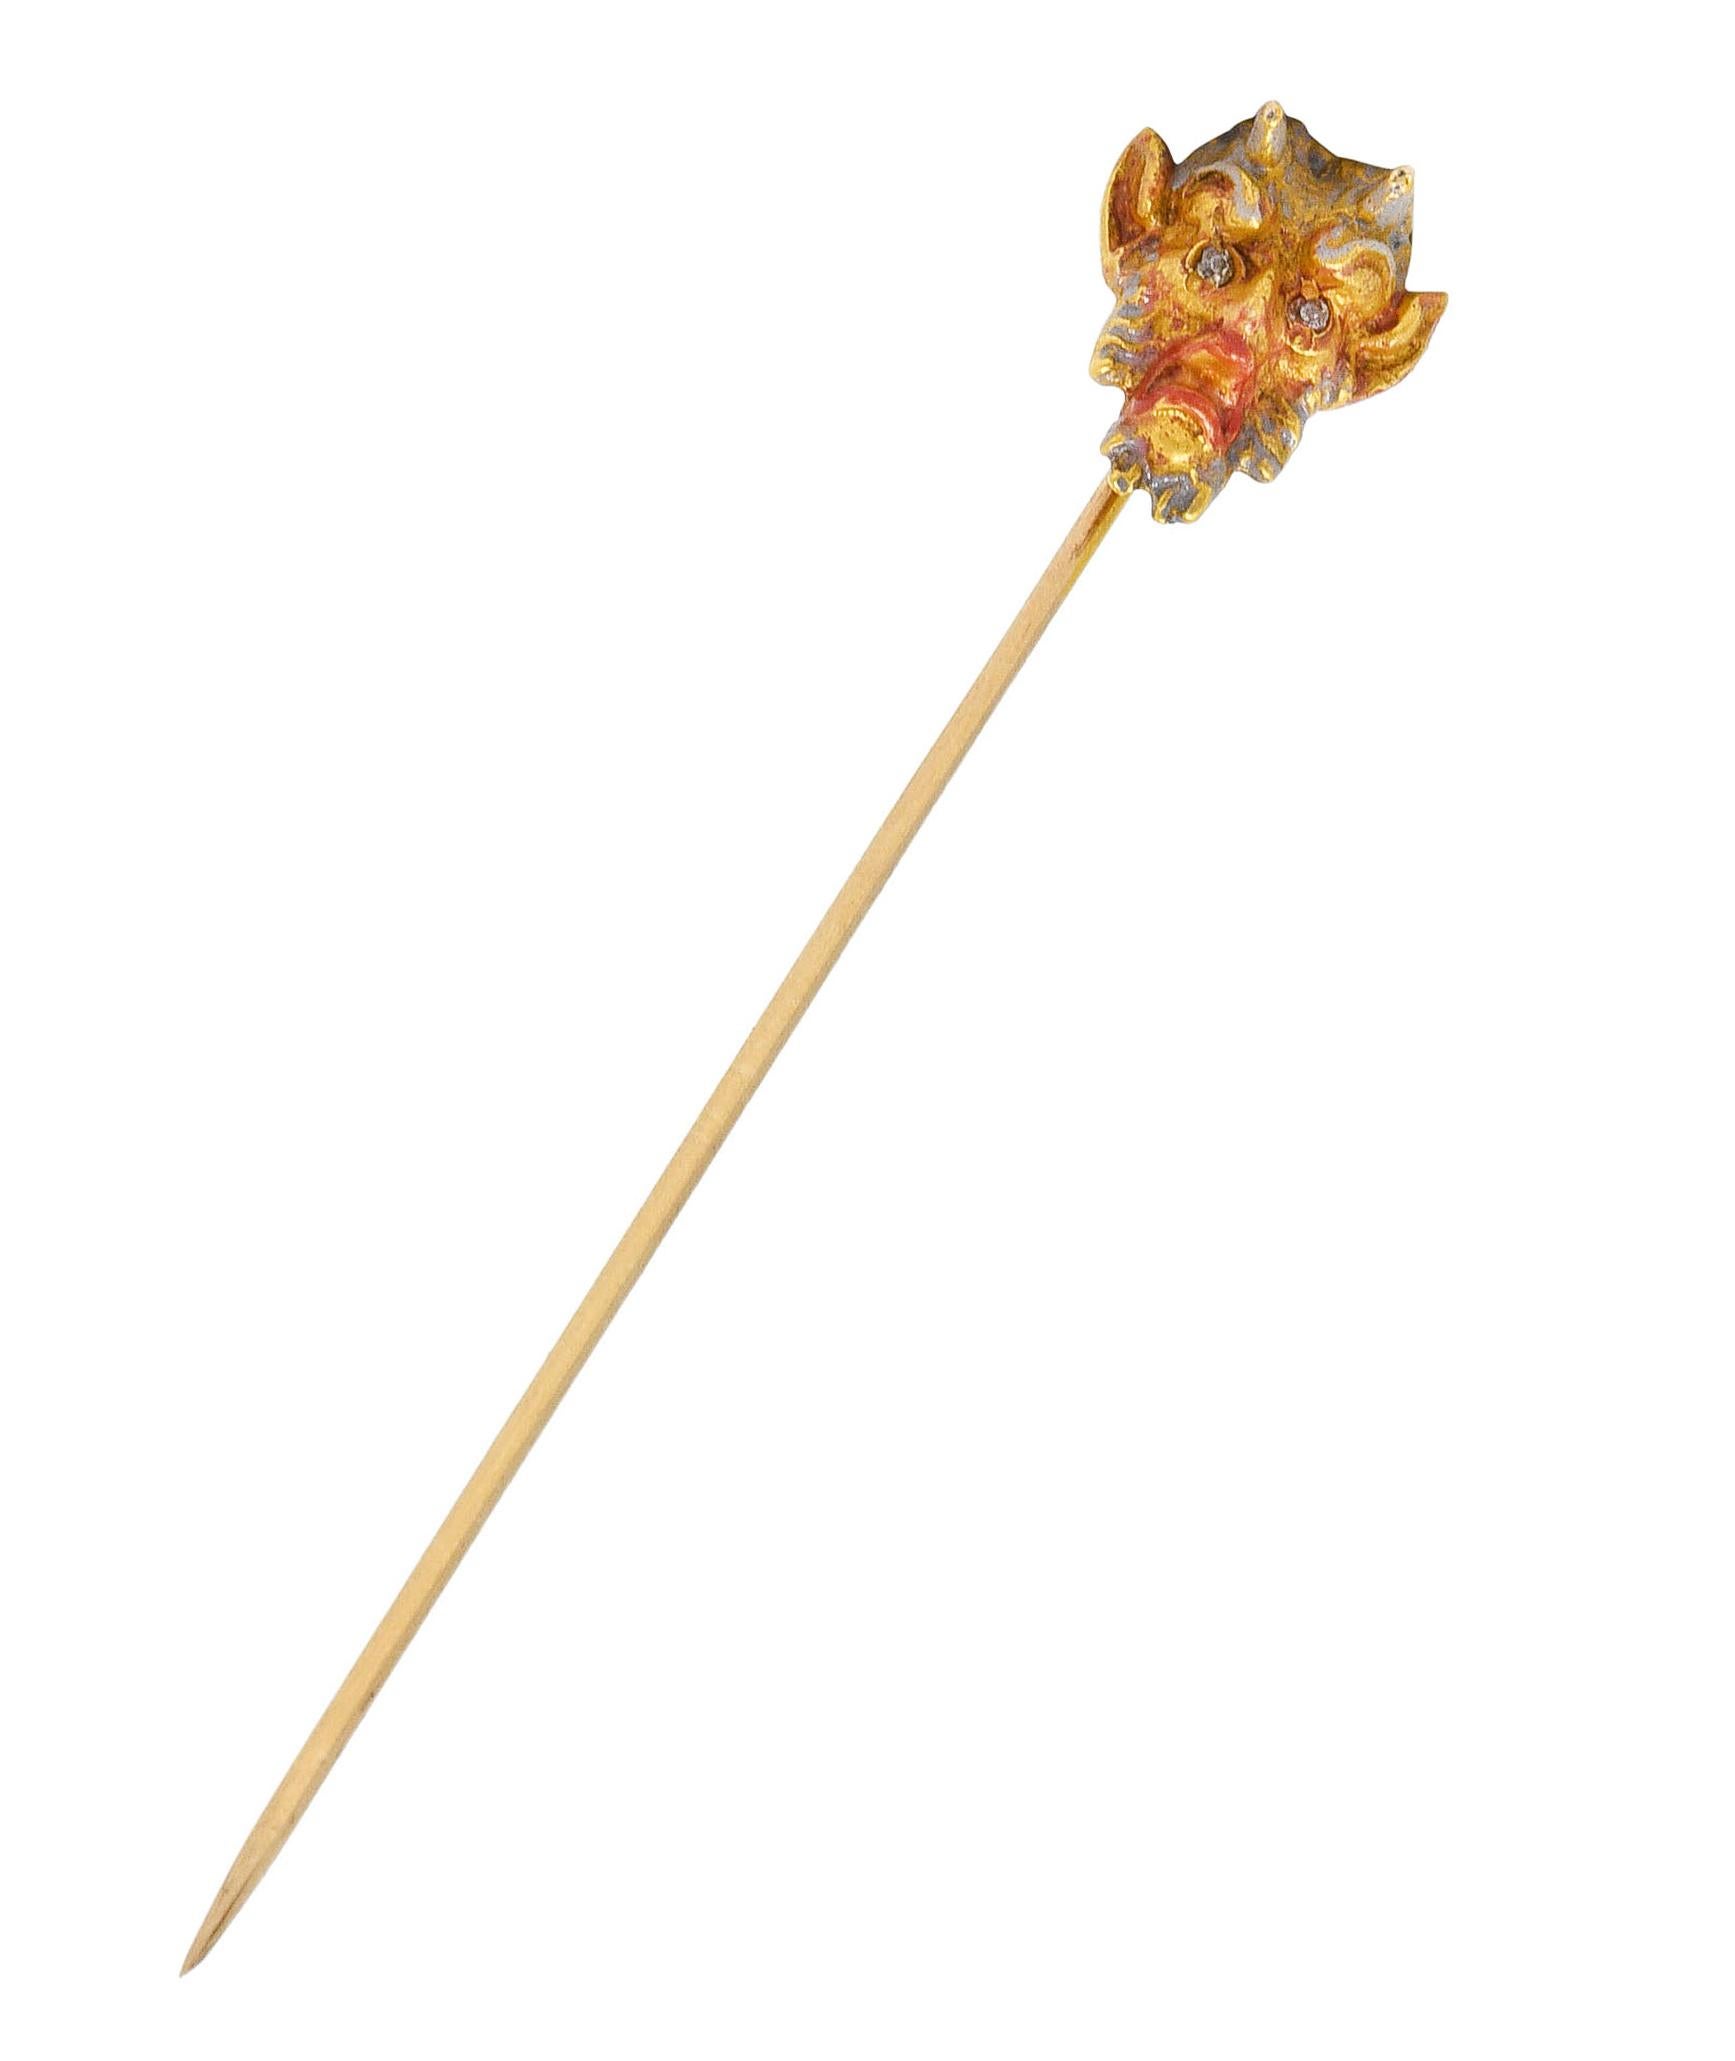 Stickpin designed as a highly stylized head of a satyr 

With textured hair, agape mouth, and enamel glossed horns 

Enamel is translucent red and gray - exhibiting some loss 

Accented by diamond eyes

Tested as 18 karat gold 

Circa: 1905

Satyr